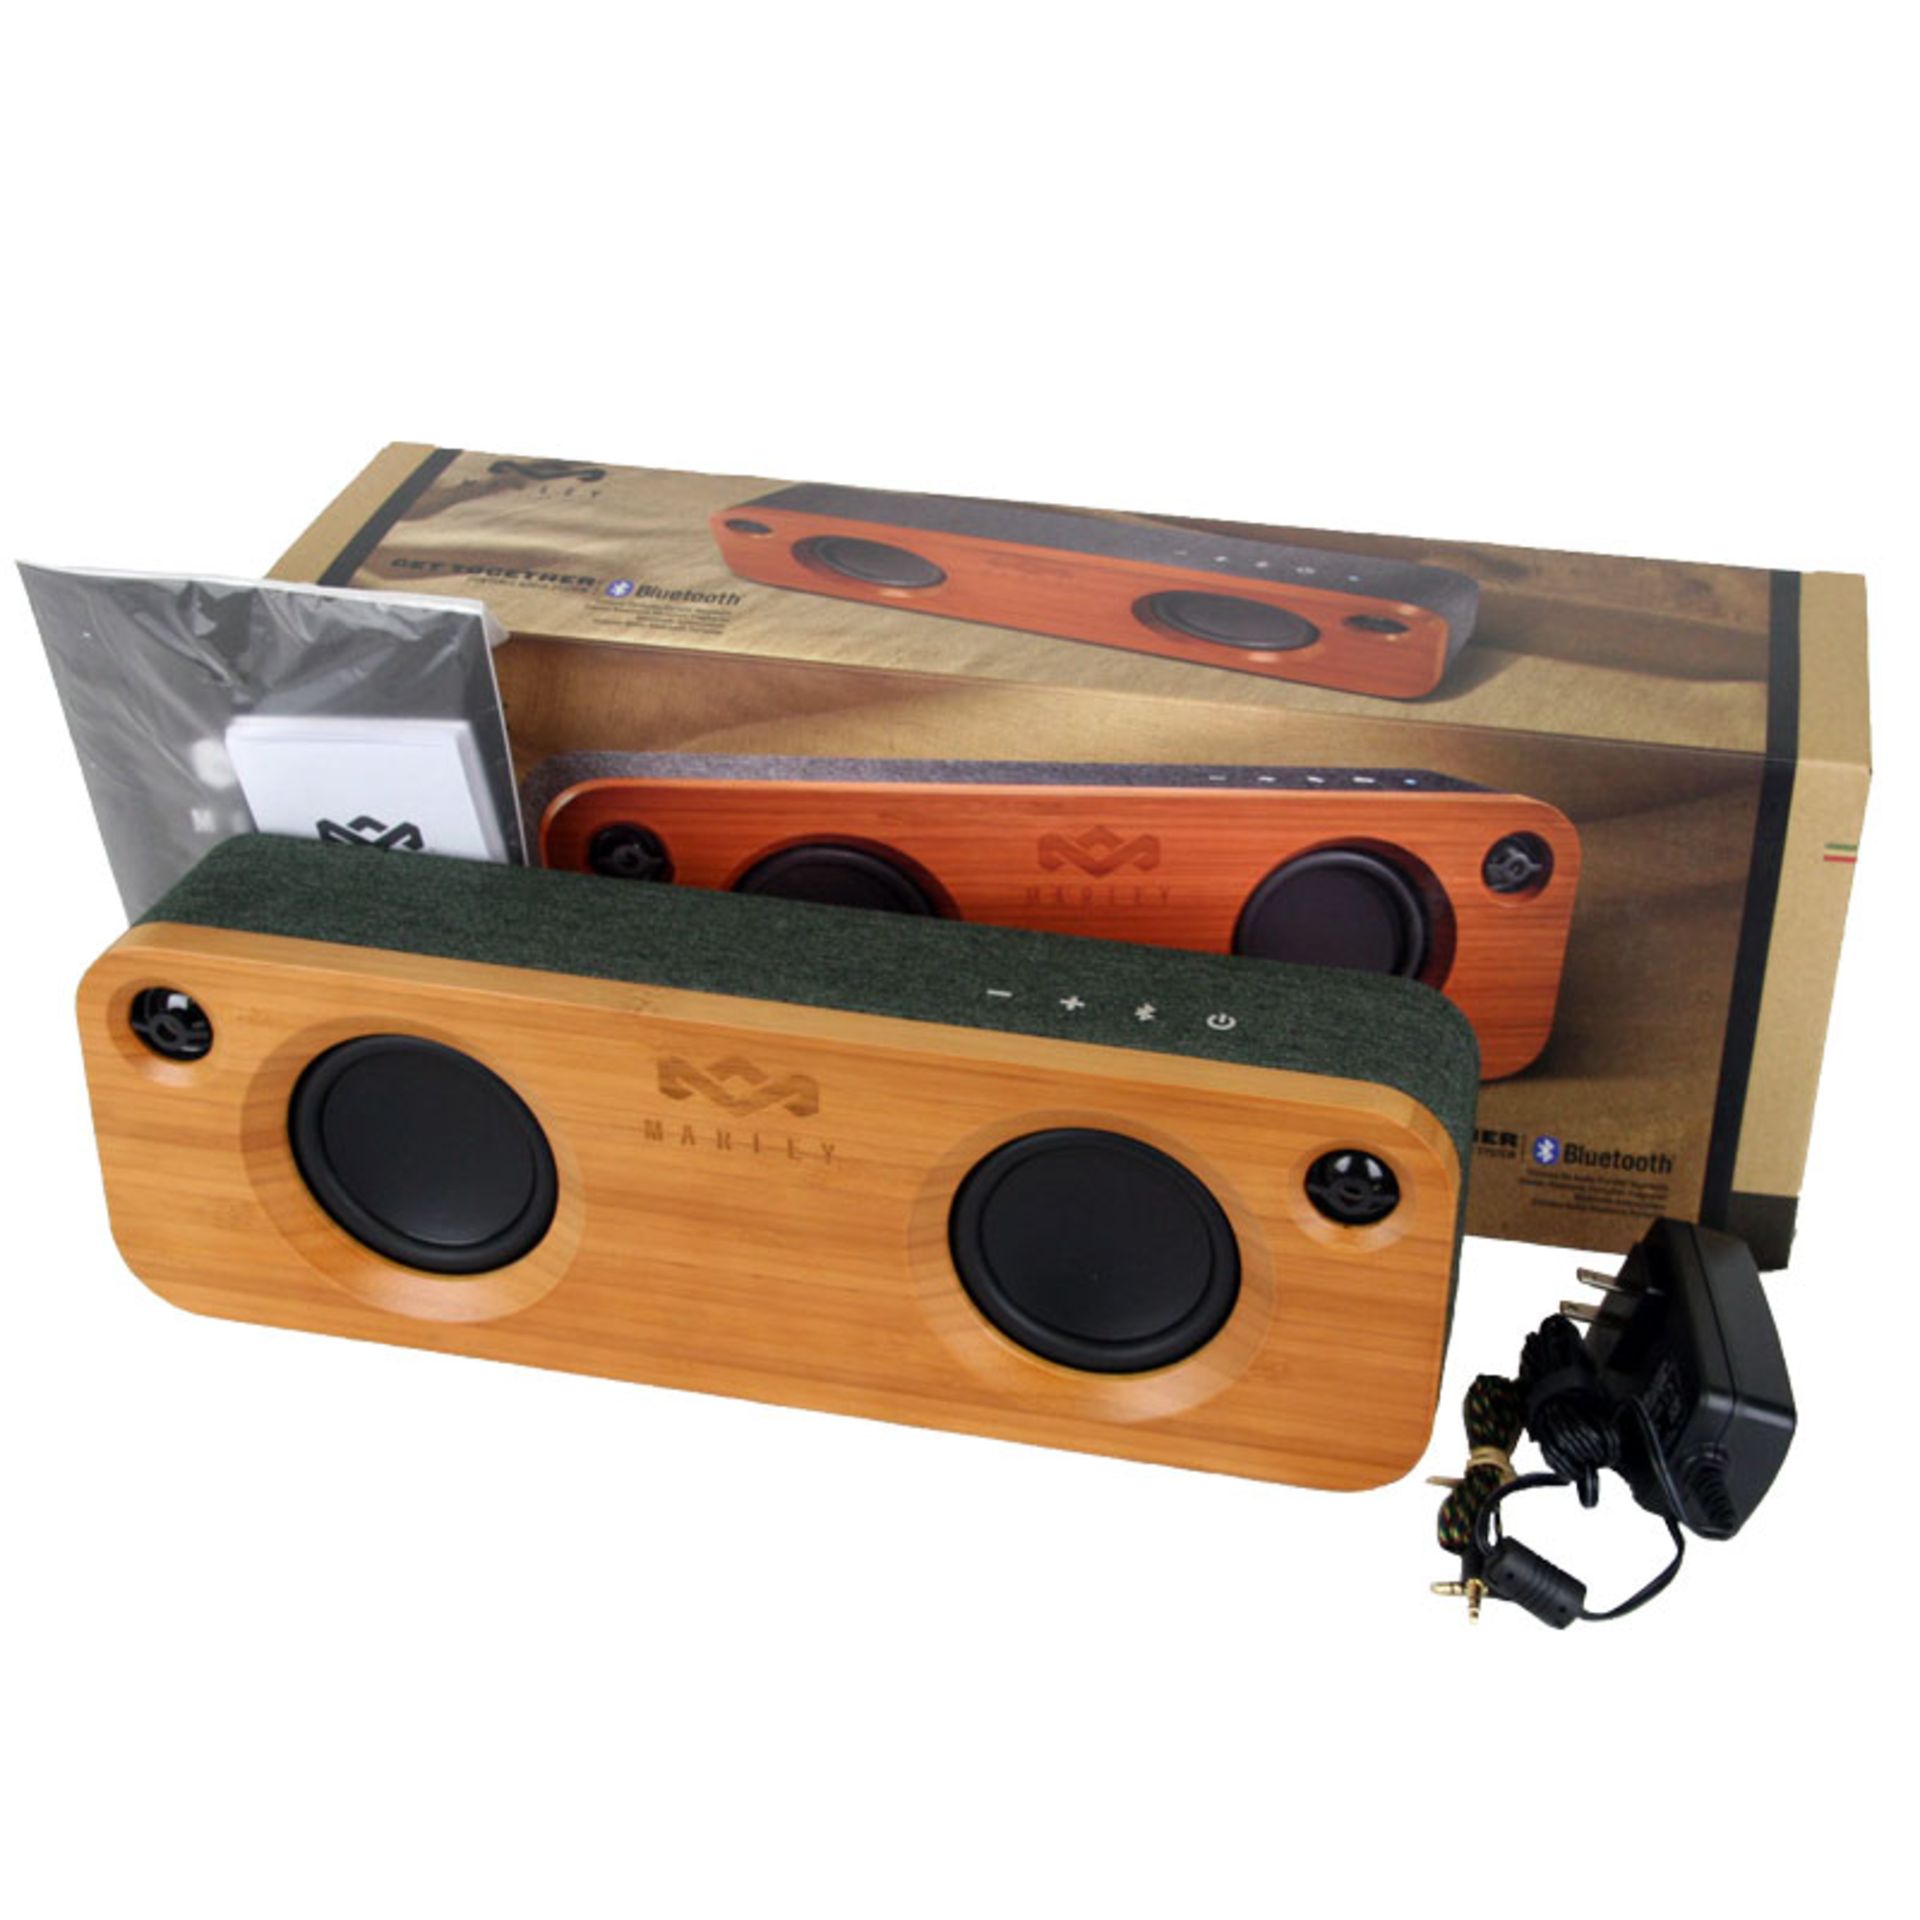 V Grade A Marley Get It Together Portable Audio System - Bluetooth - 8 Hour Battery - Exclusive